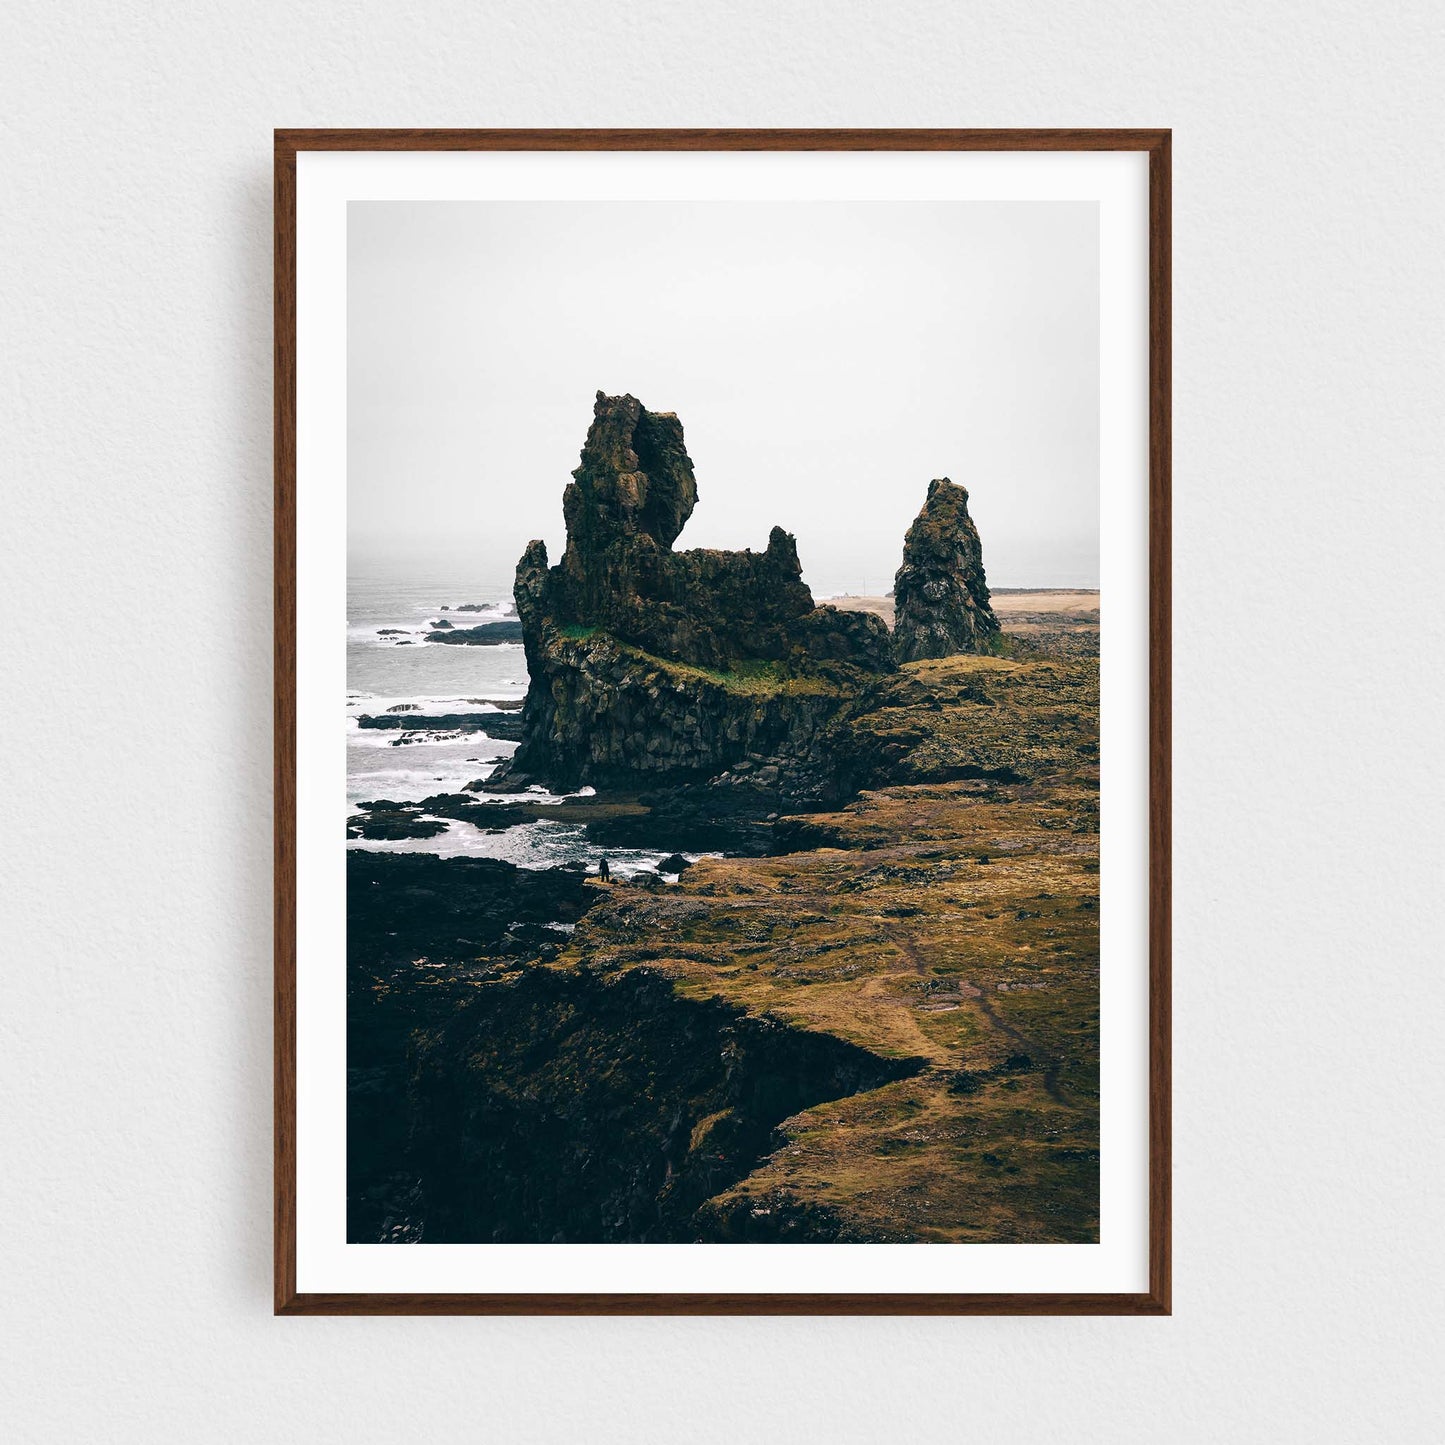 Iceland fine art photography print featuring Londrangar rock formations, in a walnut frame